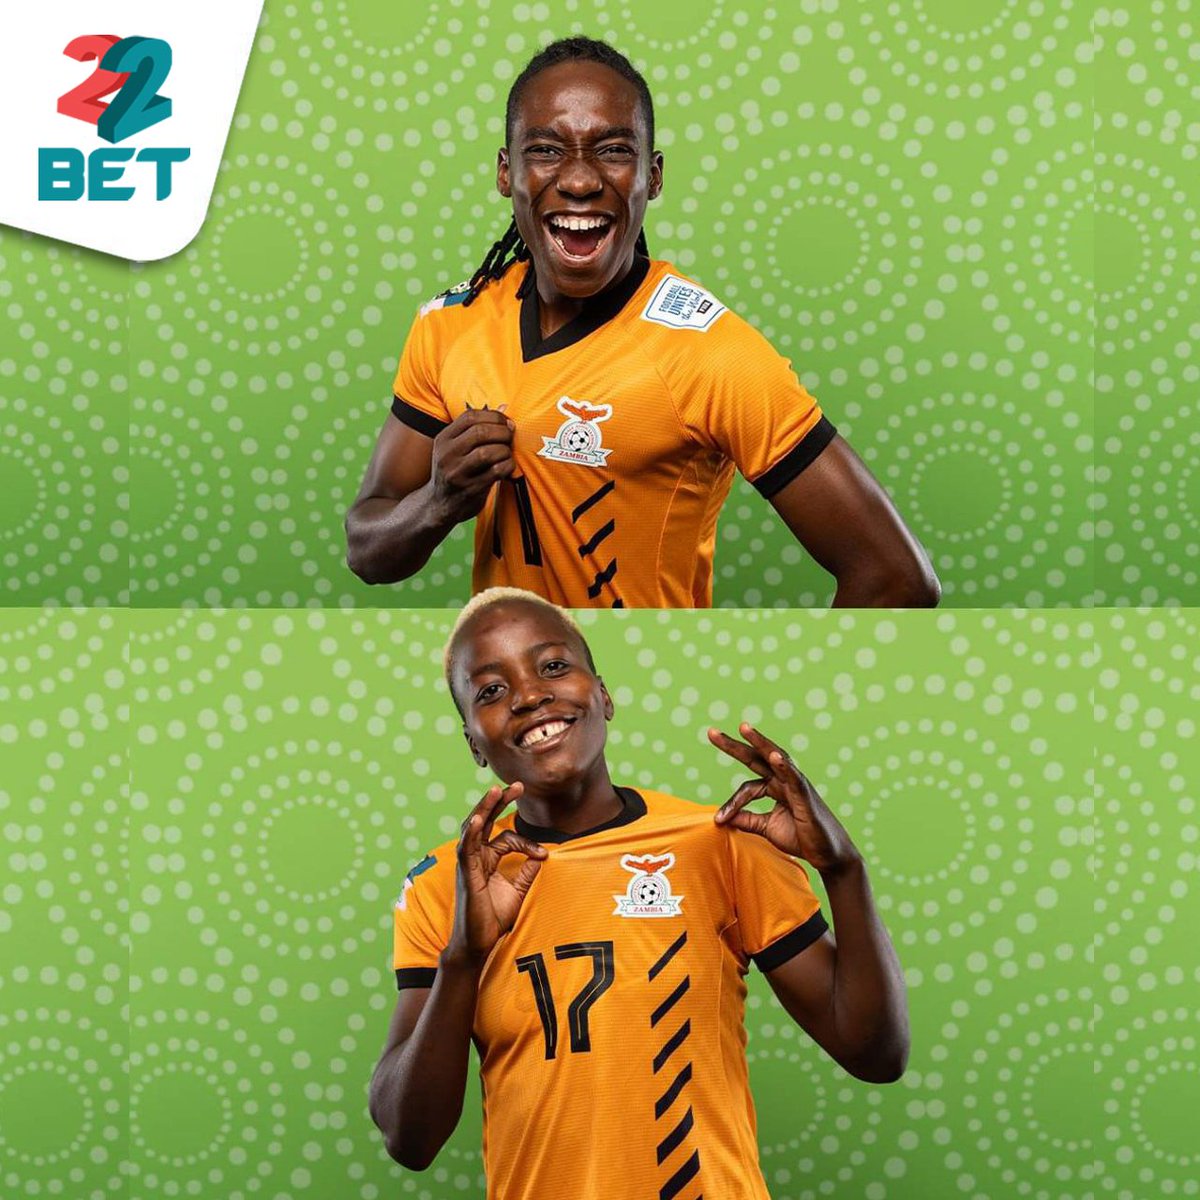 #Switchto22bet ➡️ 22bet.co.zm 
Use Promo code BET22 
200% welcome bonus up to
 1600 ZMW

Here are our hat-trick heroes 🙌 in one of the biggest away wins for the Copper Queens. 
Morocco 🇲🇦  2 - 6 Zambia 🇿🇲.

#WeAreCopperQueens #Zambiakuchalo #22BetZambia #Bestodds